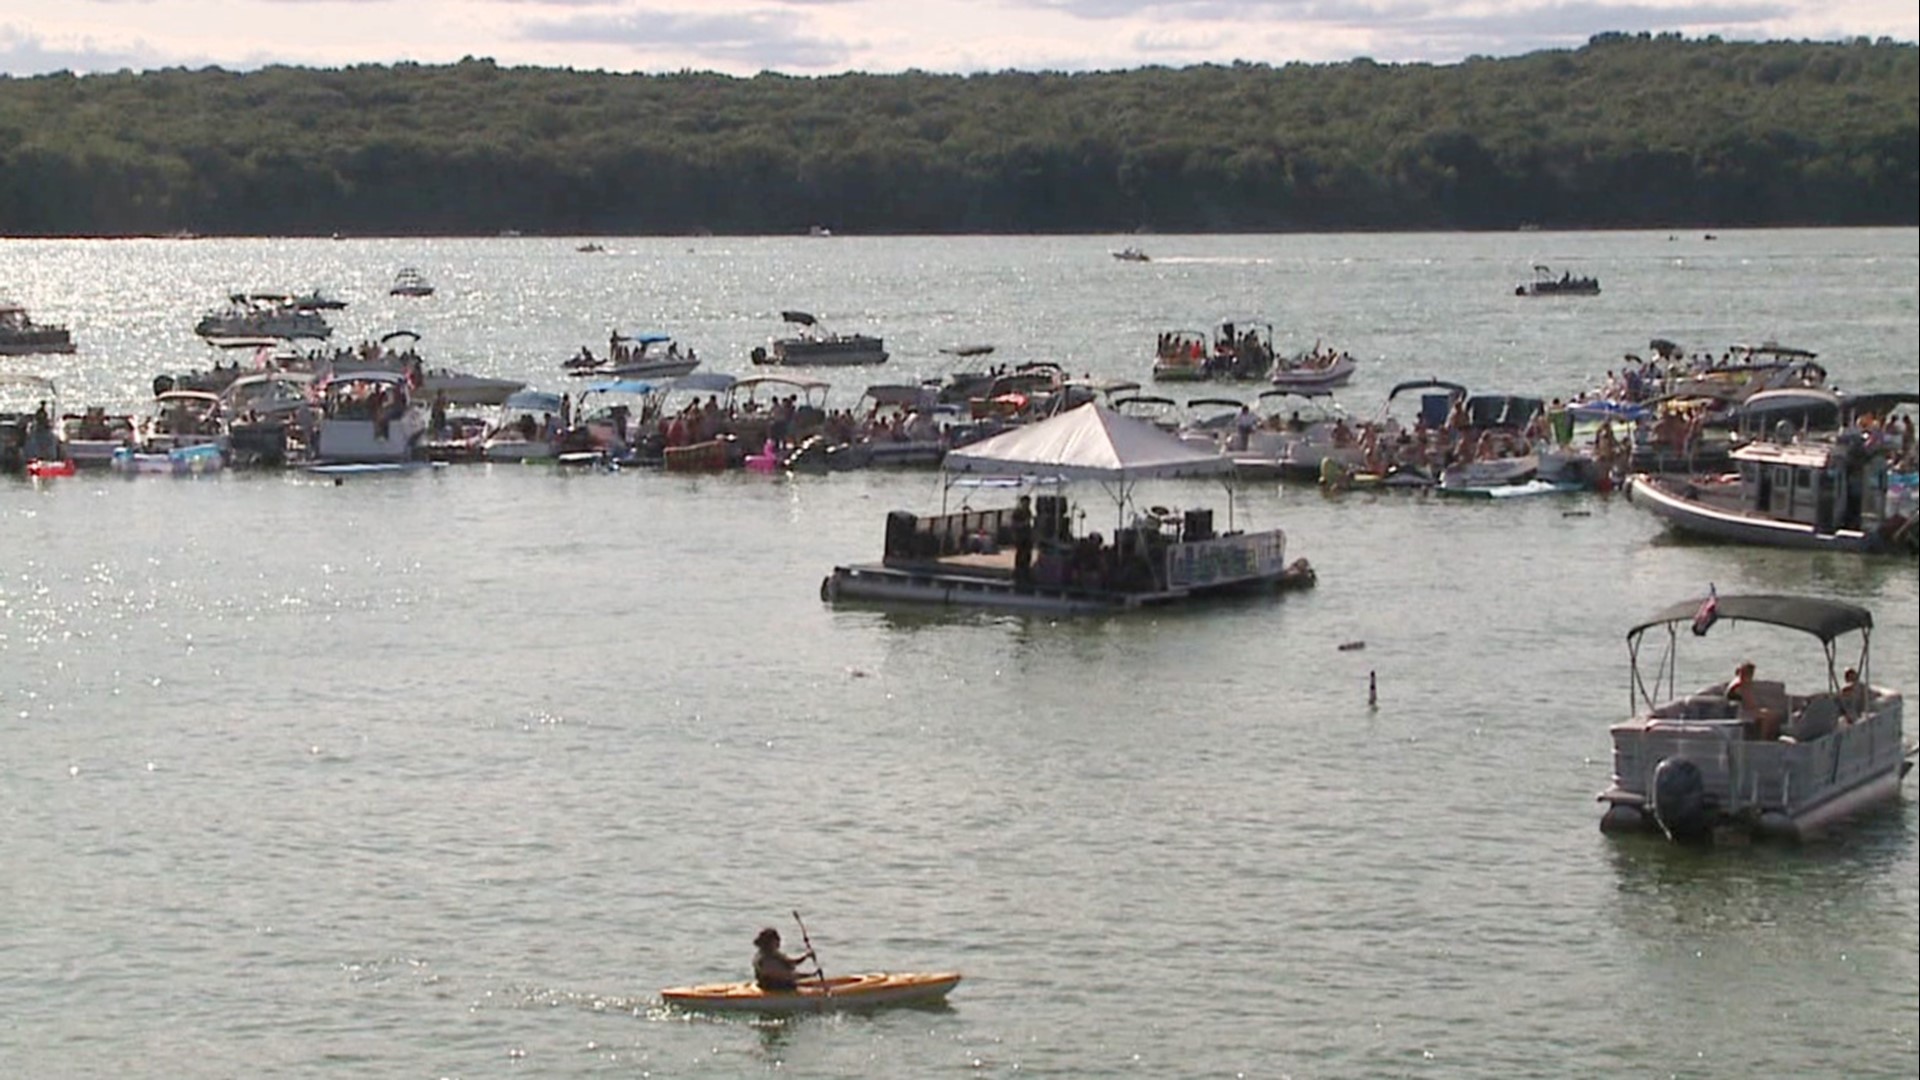 Newswatch 16's Elizabeth Worthington talked to the organizers of the 12th annual event in and around Lake Wallenpaupack.